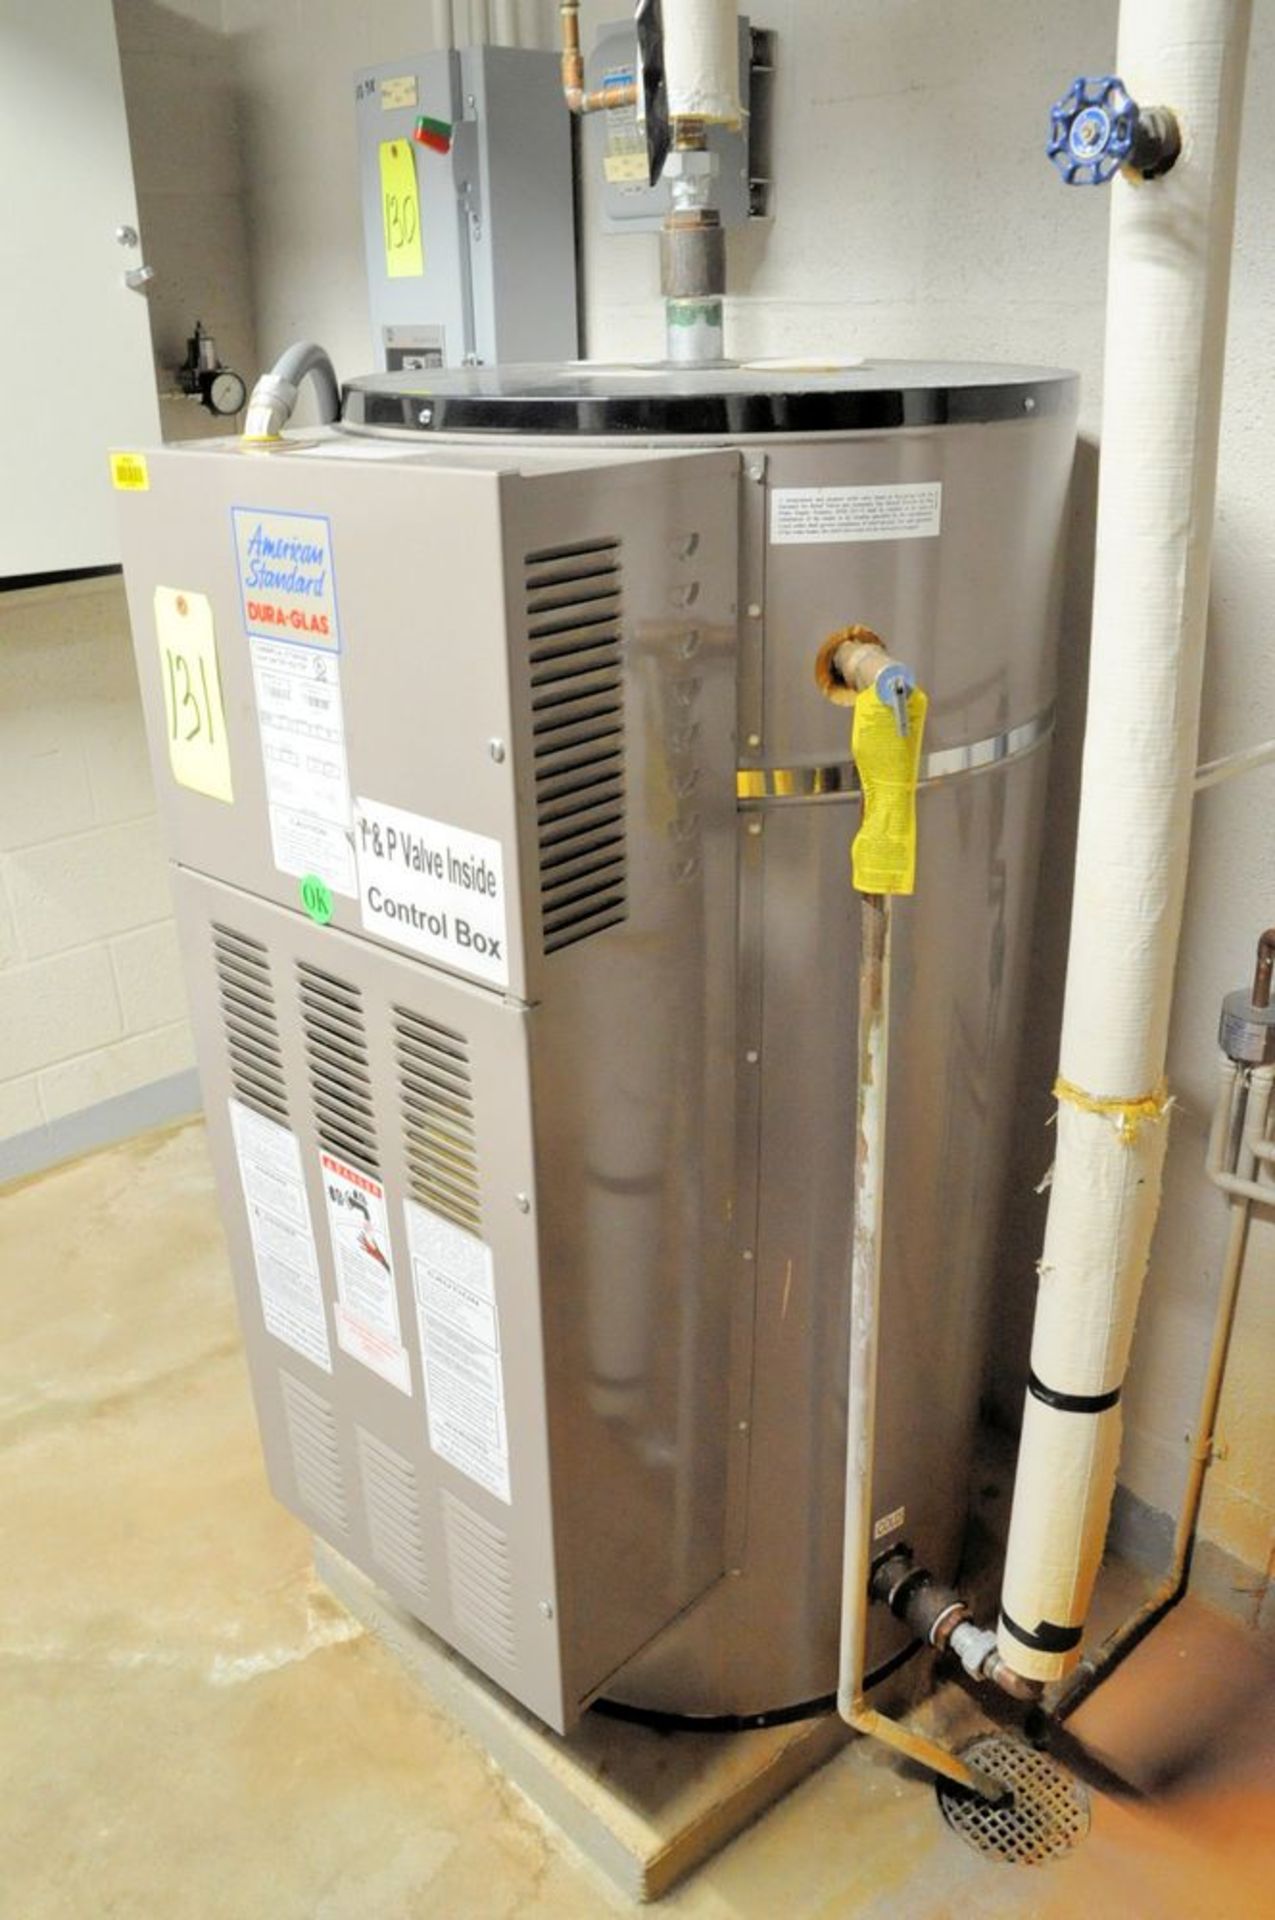 American Standard Dura-Glas Model CE-52 AS, 52-Gallon Electric Hot Water Heater, S/n F08-3427, 3-PH, - Image 2 of 3